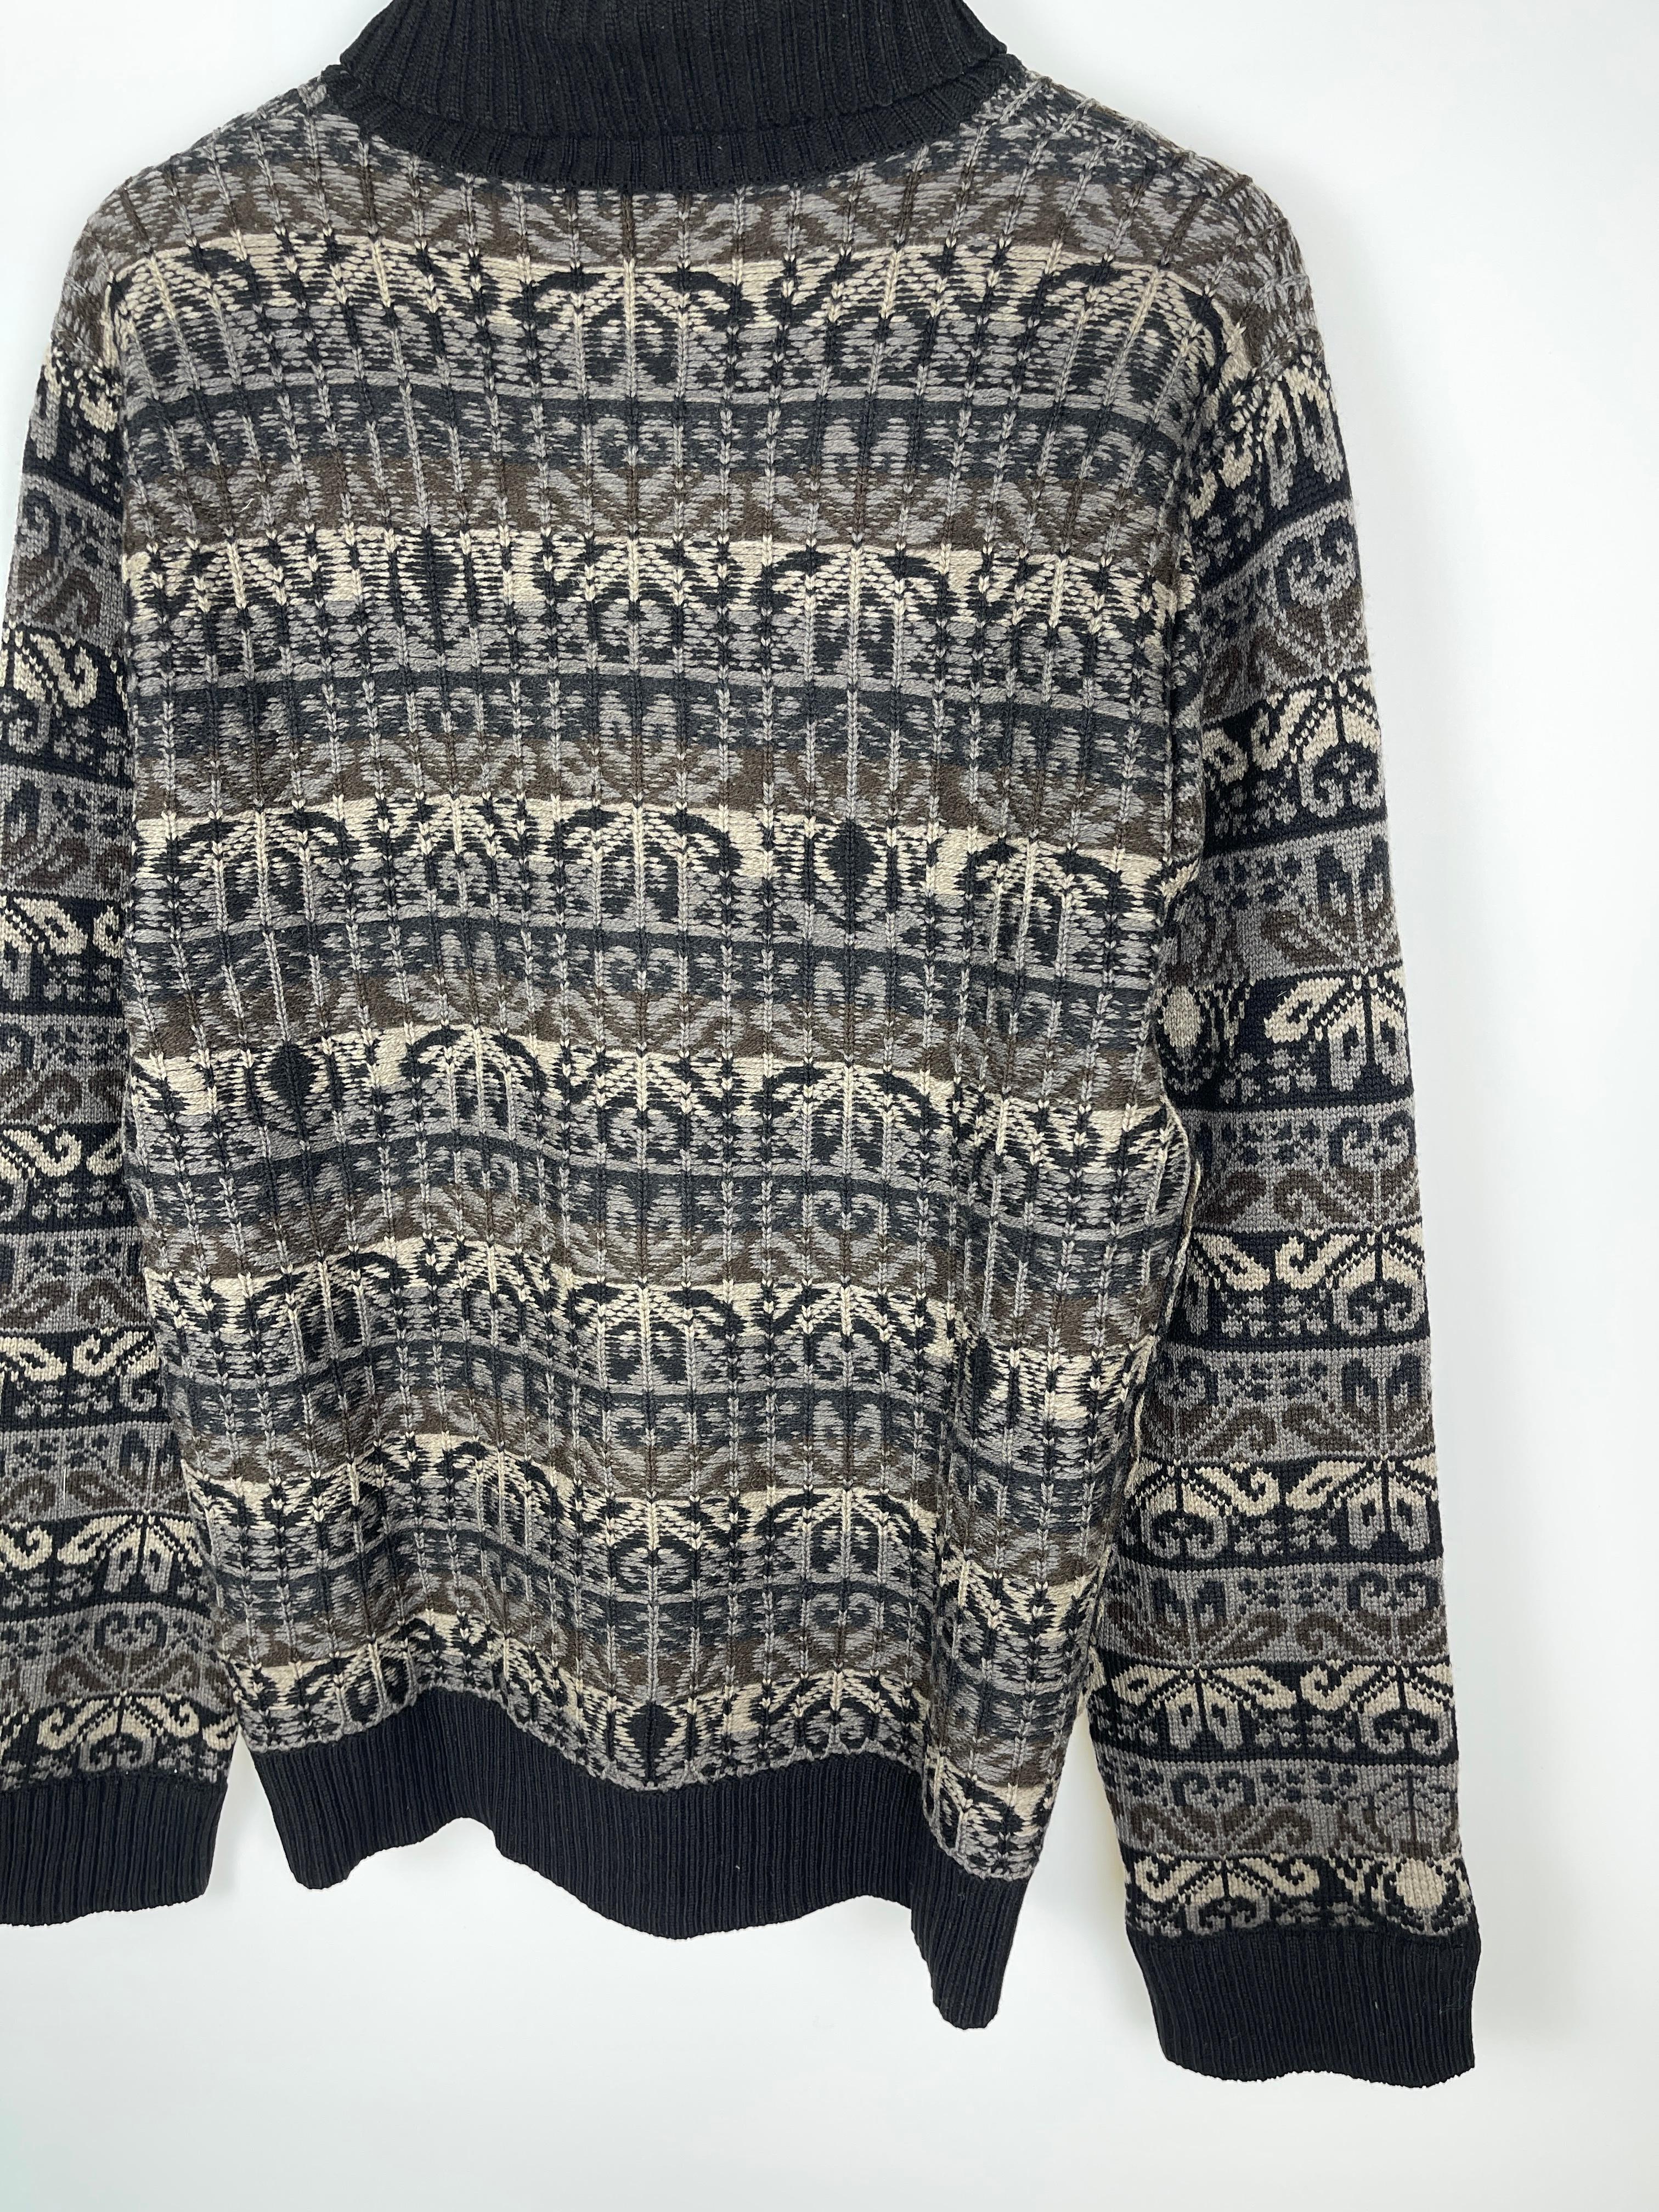 Yohji Yamamoto Pour Homme Intarsia Floral Sweater  For Sale 5